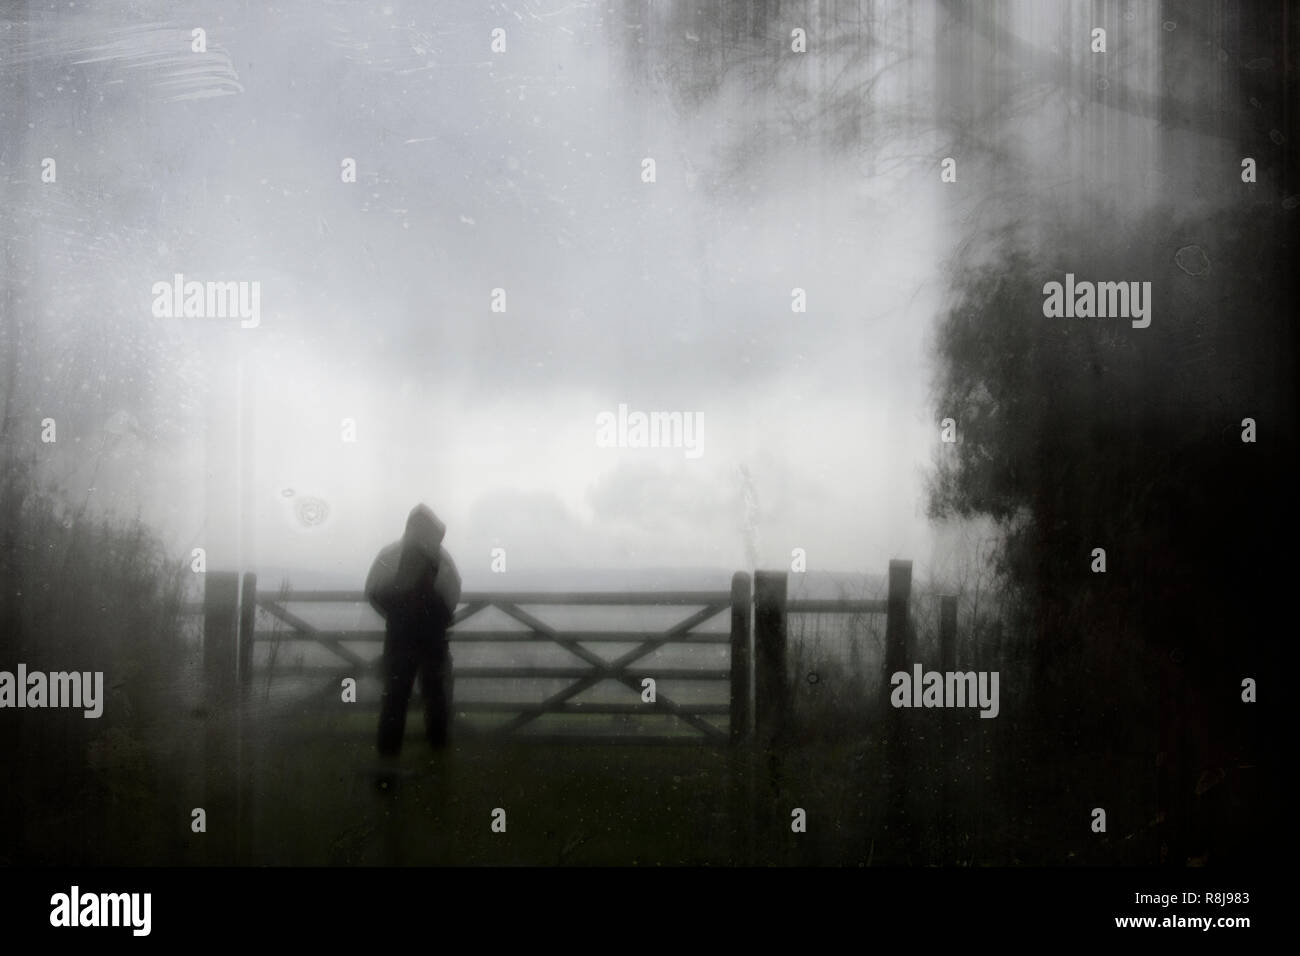 An eerie silhouette of a lone hooded figure by a gate surrounded by trees. With a dark, spooky blurred abstract, grunge effect edit. Stock Photo